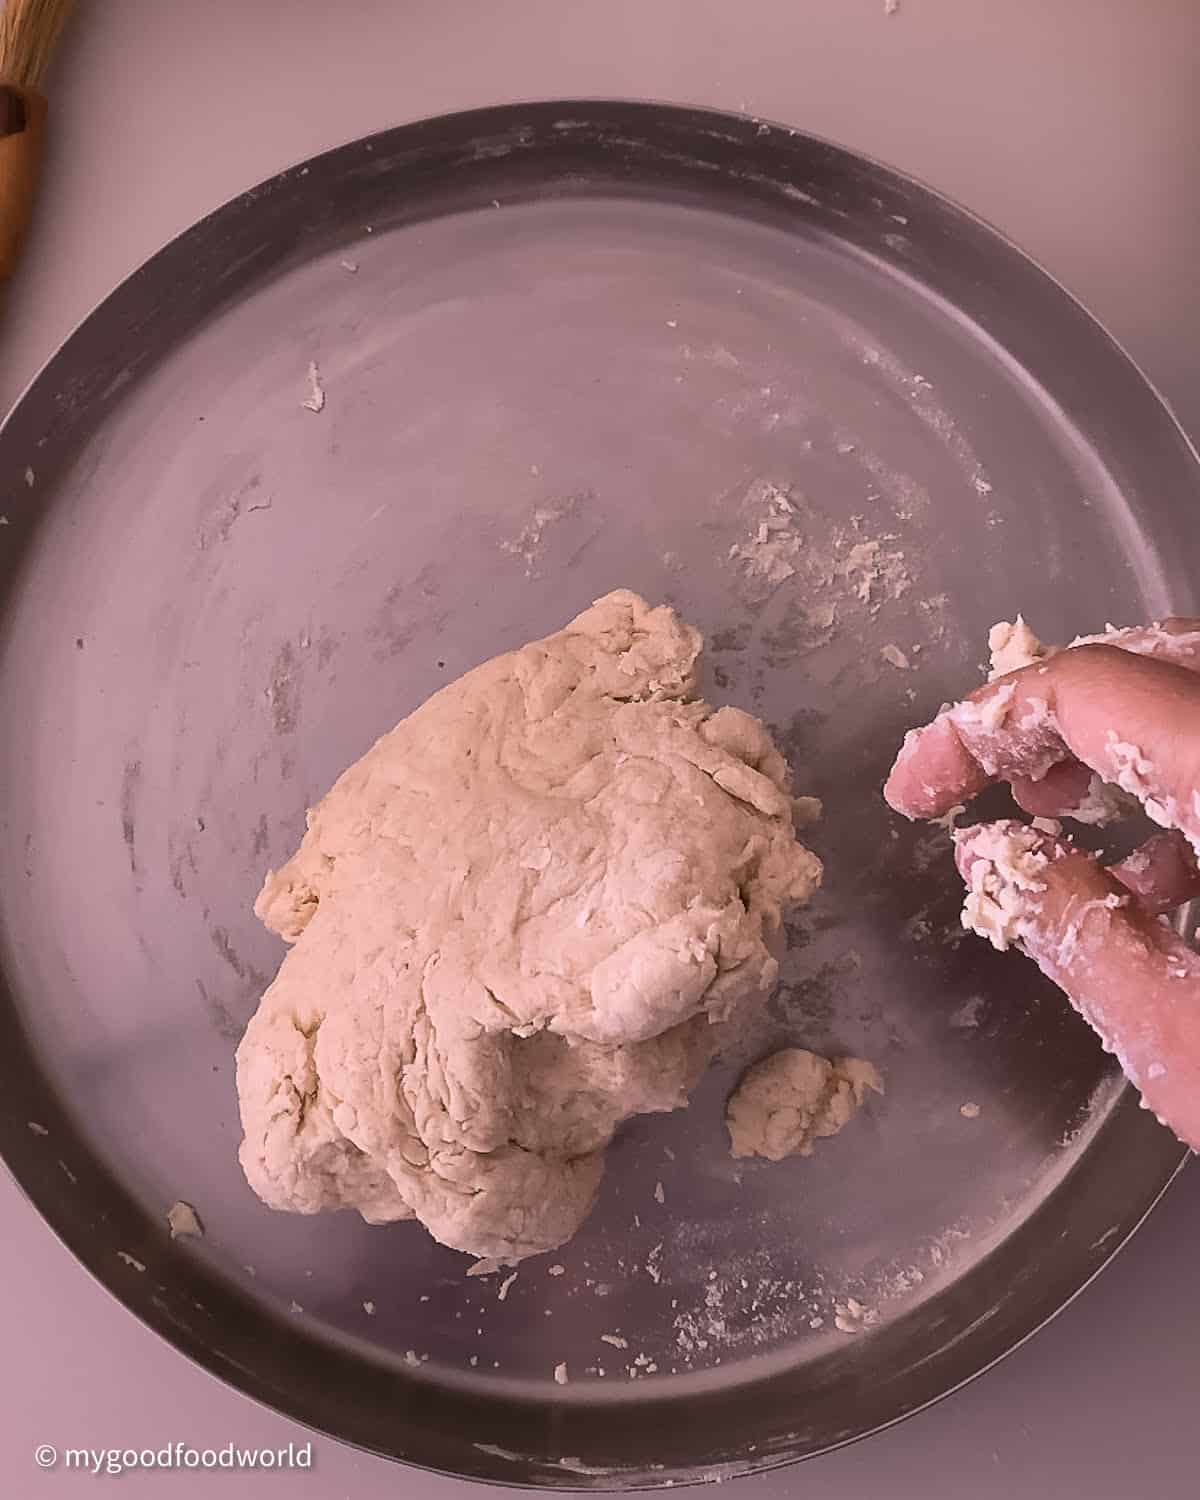 Plain flour sticky dough is kept on a steel plate. A hand is seen with some dough on it. 